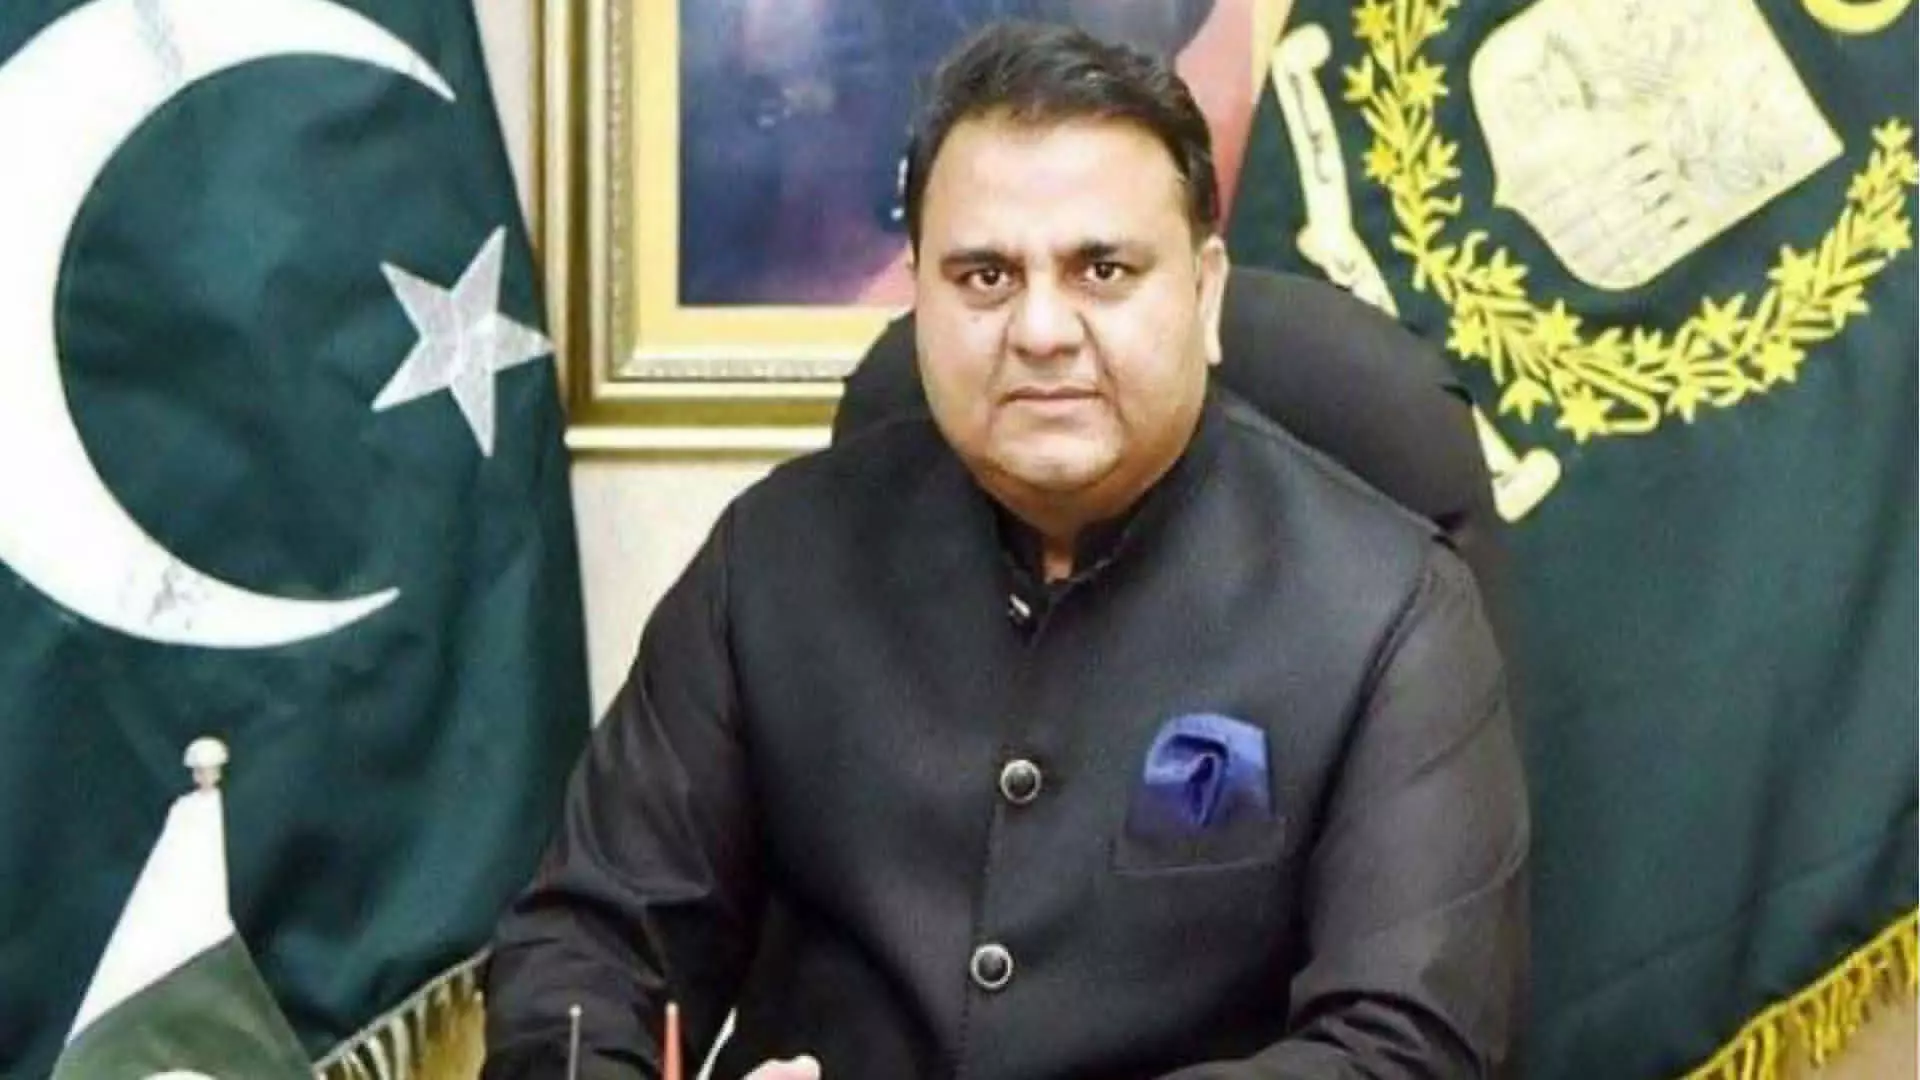 Pakistan Minister Chaudhry Fawad Hussain gave a statement on destroy of the statue of Maharaja Ranjit Singh